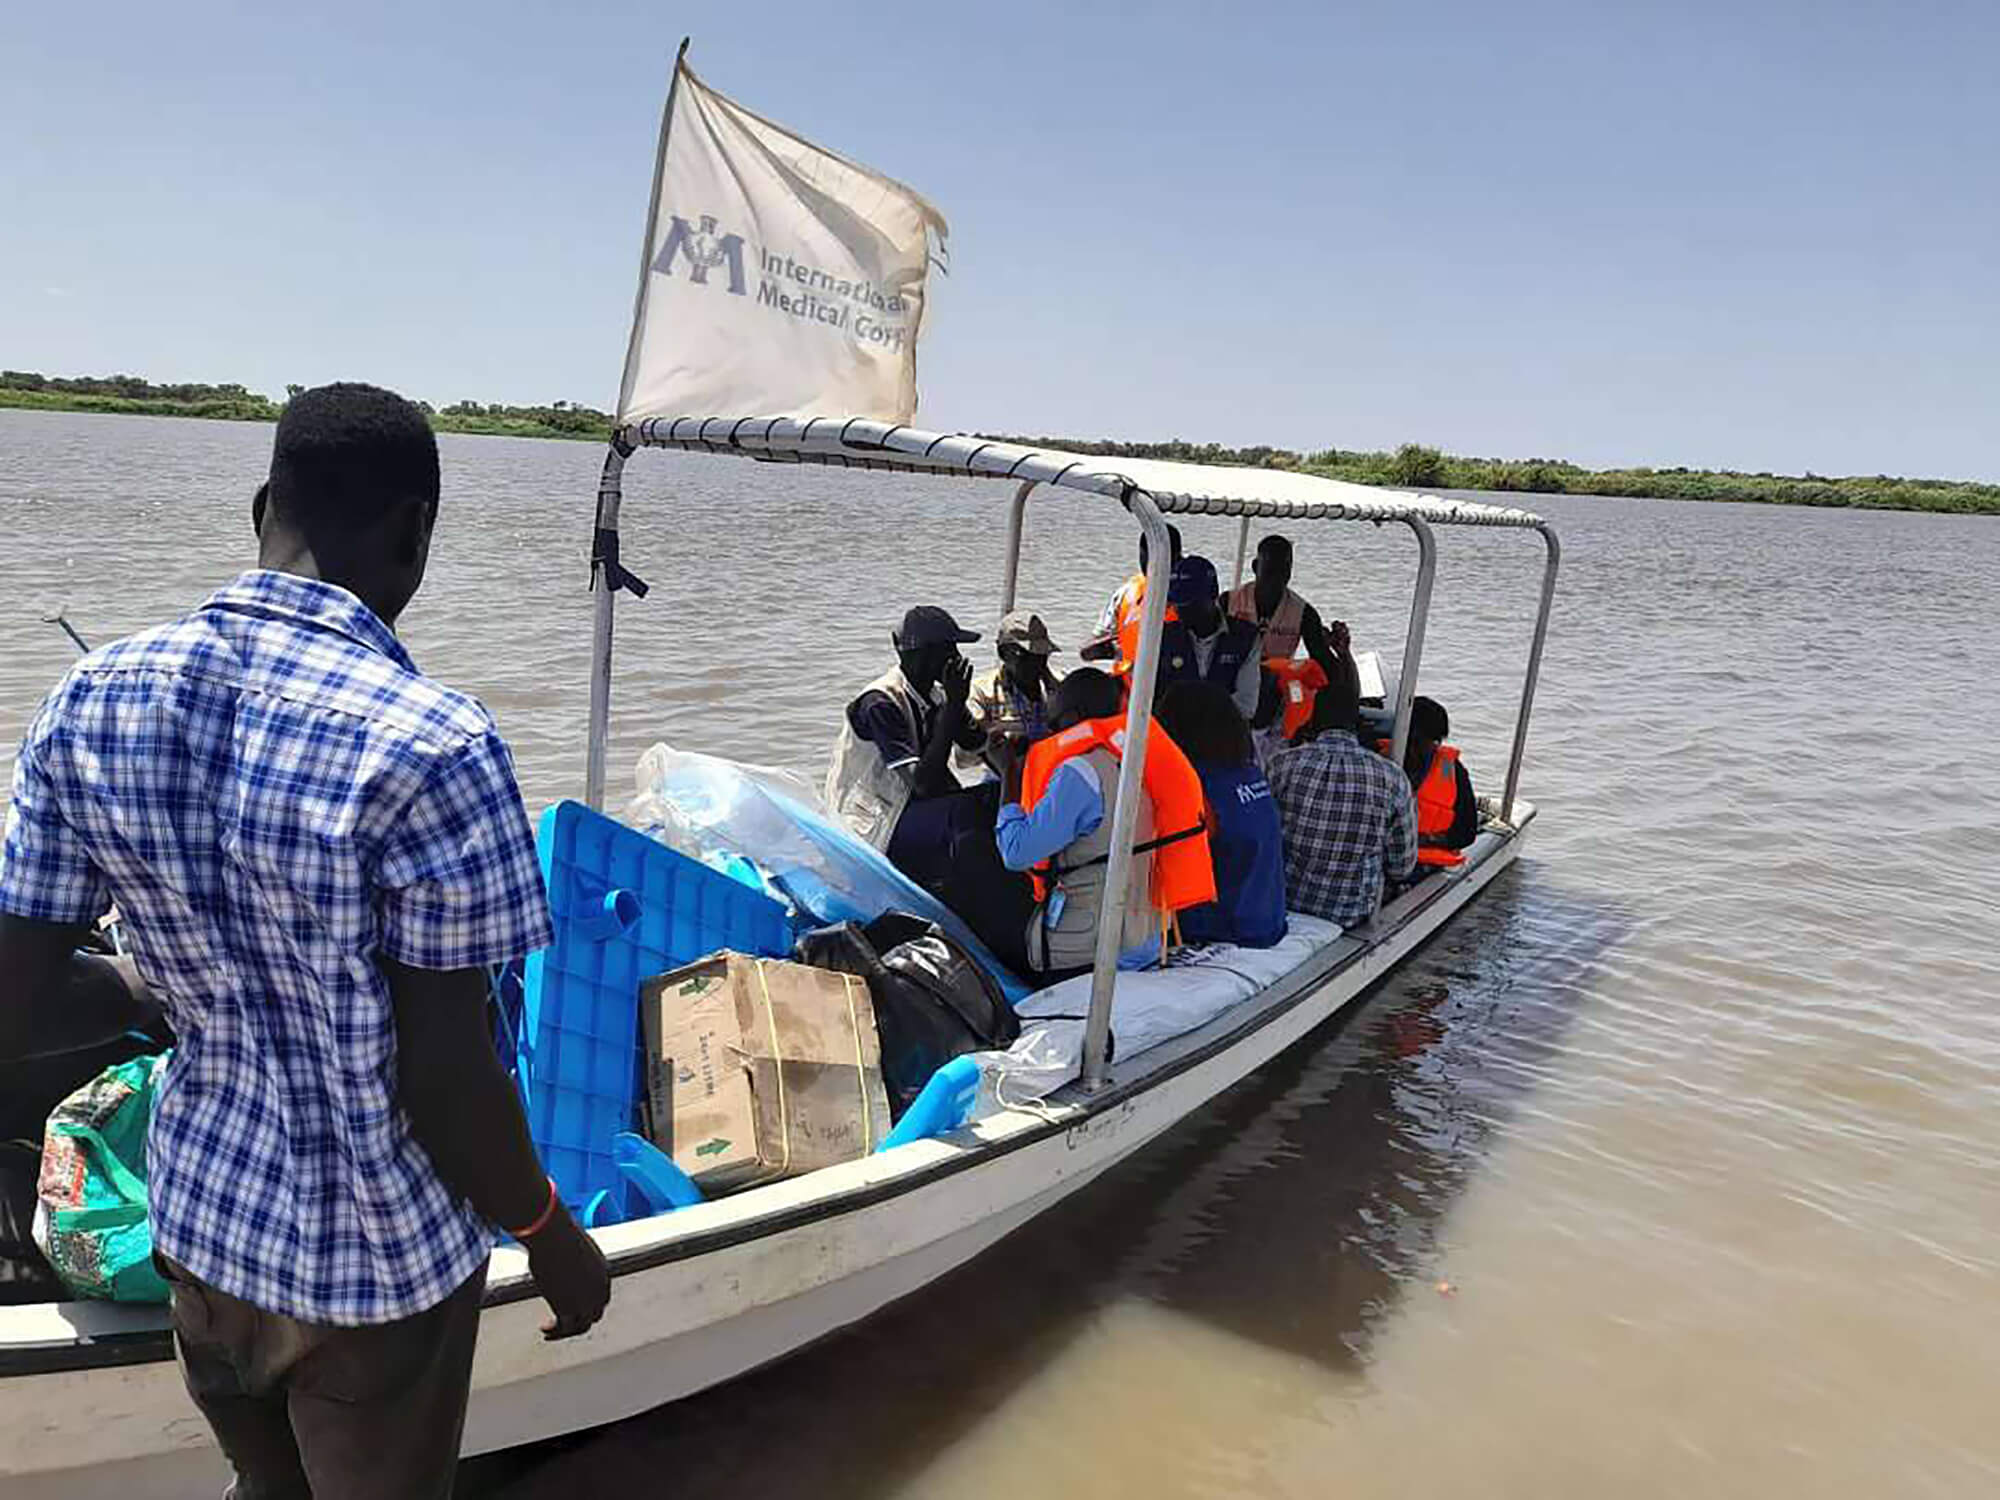 In April, our team travelled by boat from Malakal to Renk to help Sudanese refugees fleeing the conflict and attempting to cross into South Sudan.